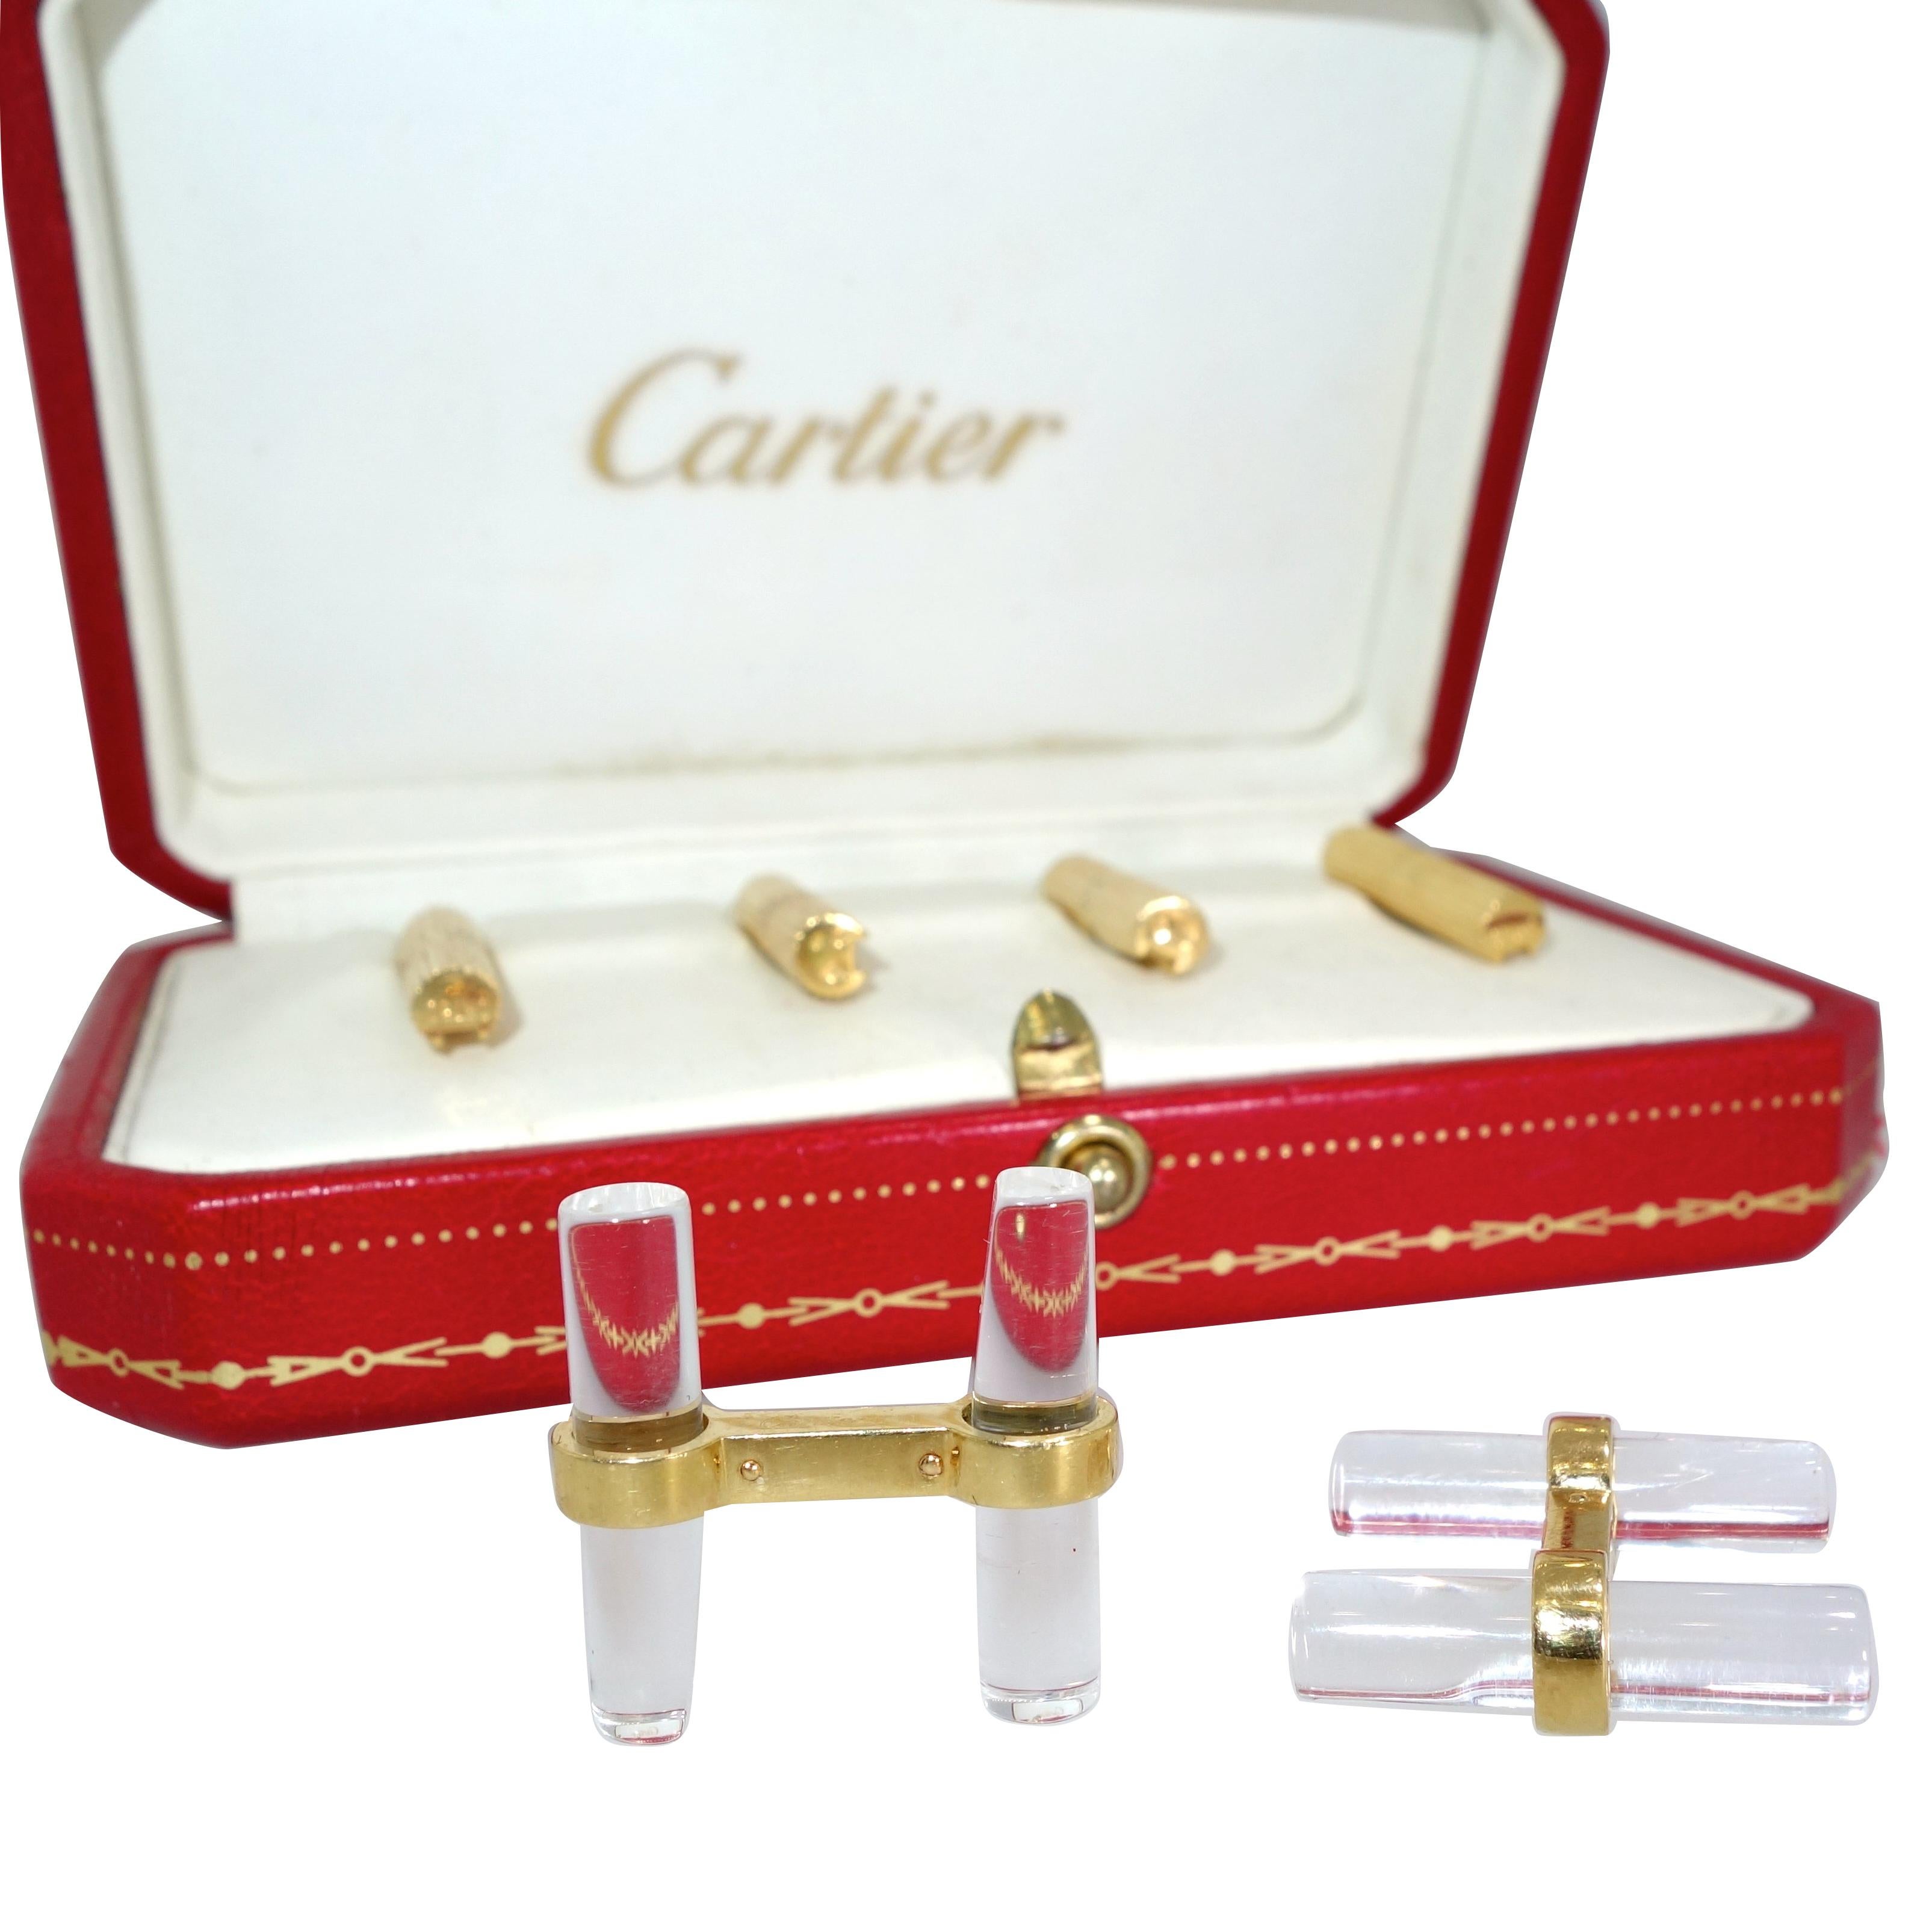 Cartier Cuff and Stud set.